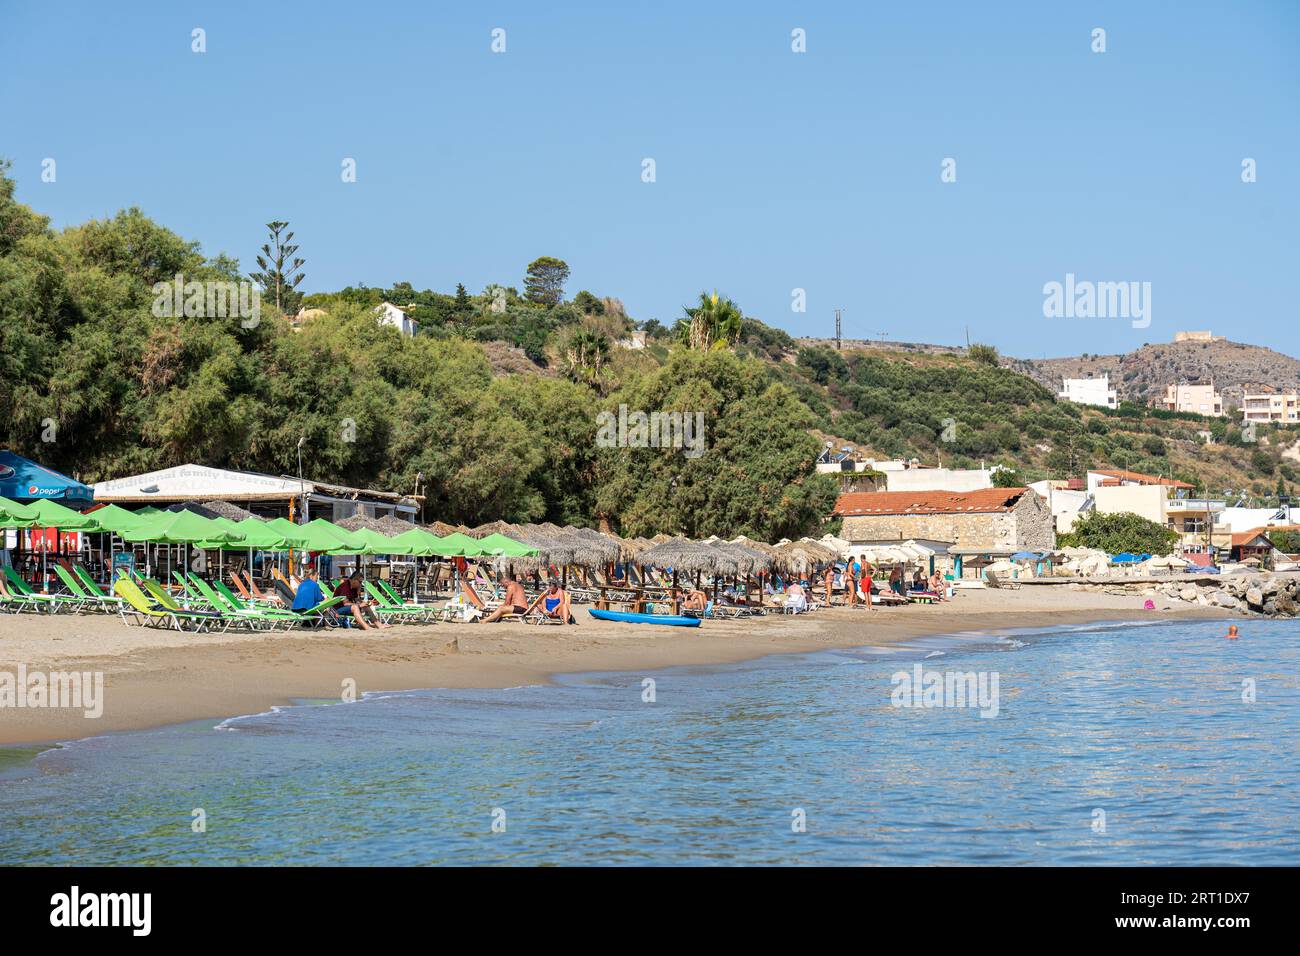 Crete, Greece, September 21, 2021: People at the local beach in Kalives Stock Photo